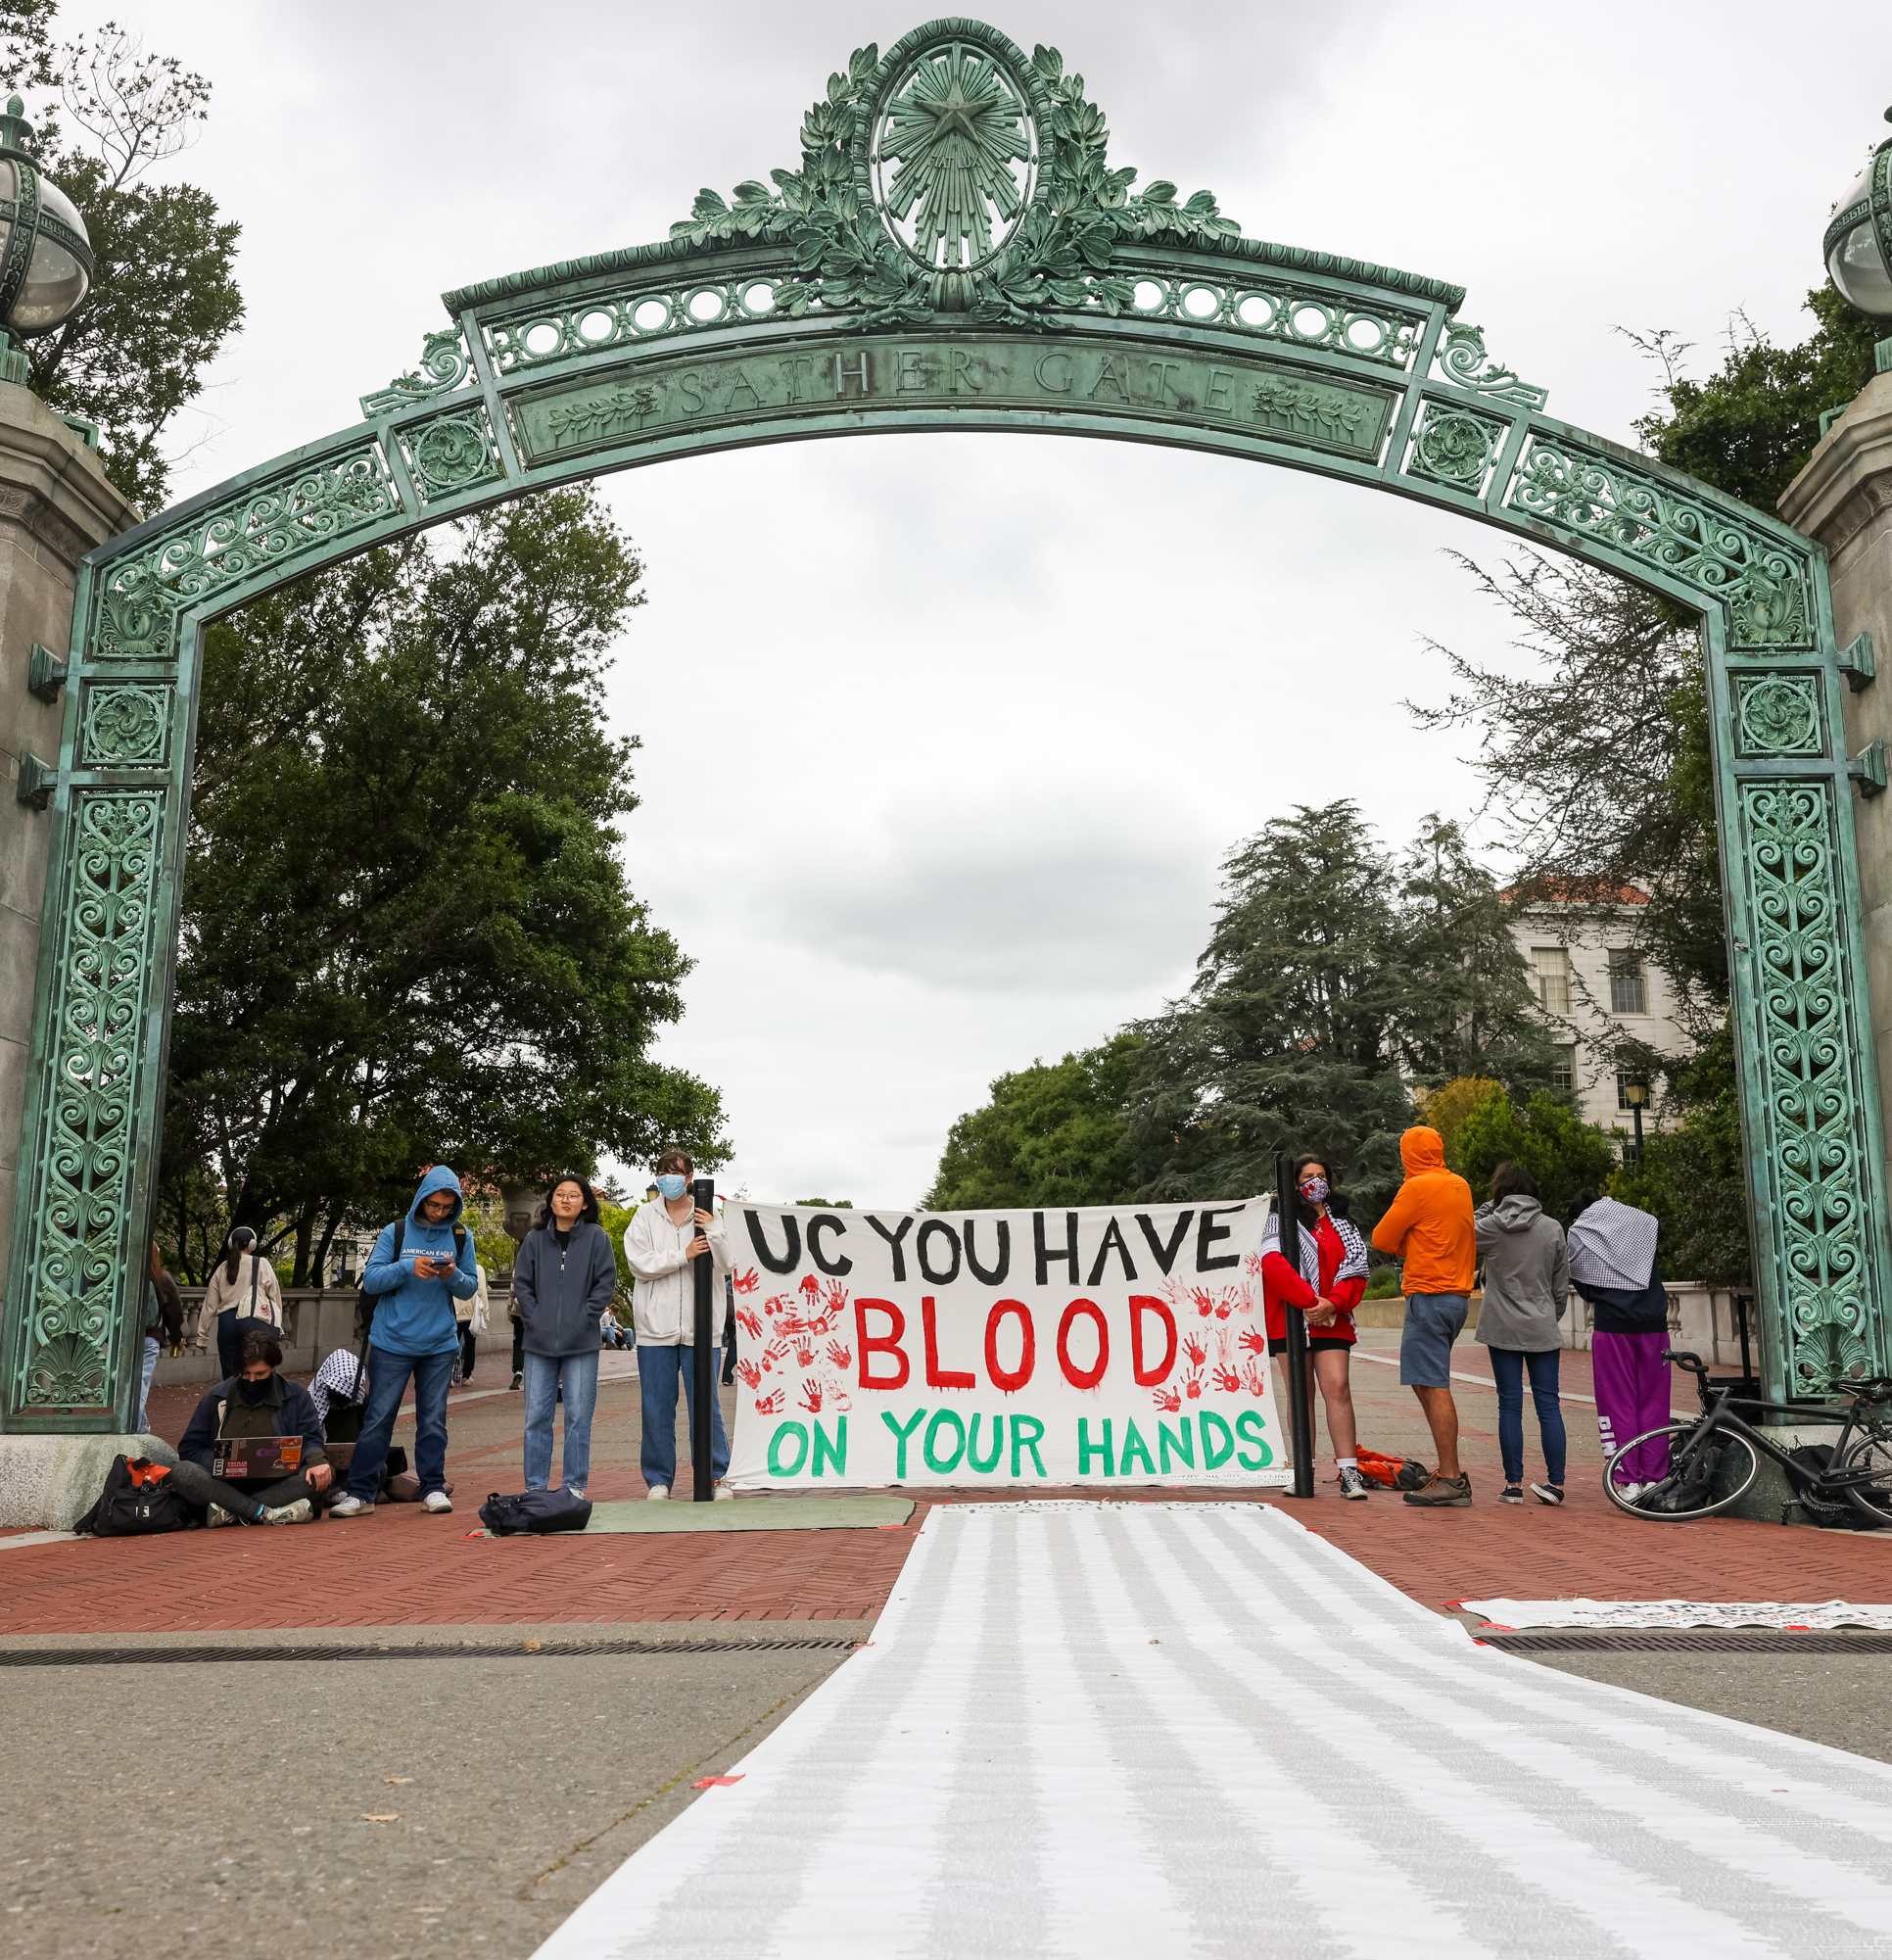 A group of people stands under an ornate archway, holding a sign that says &quot;UC YOU HAVE BLOOD ON YOUR HANDS.&quot;